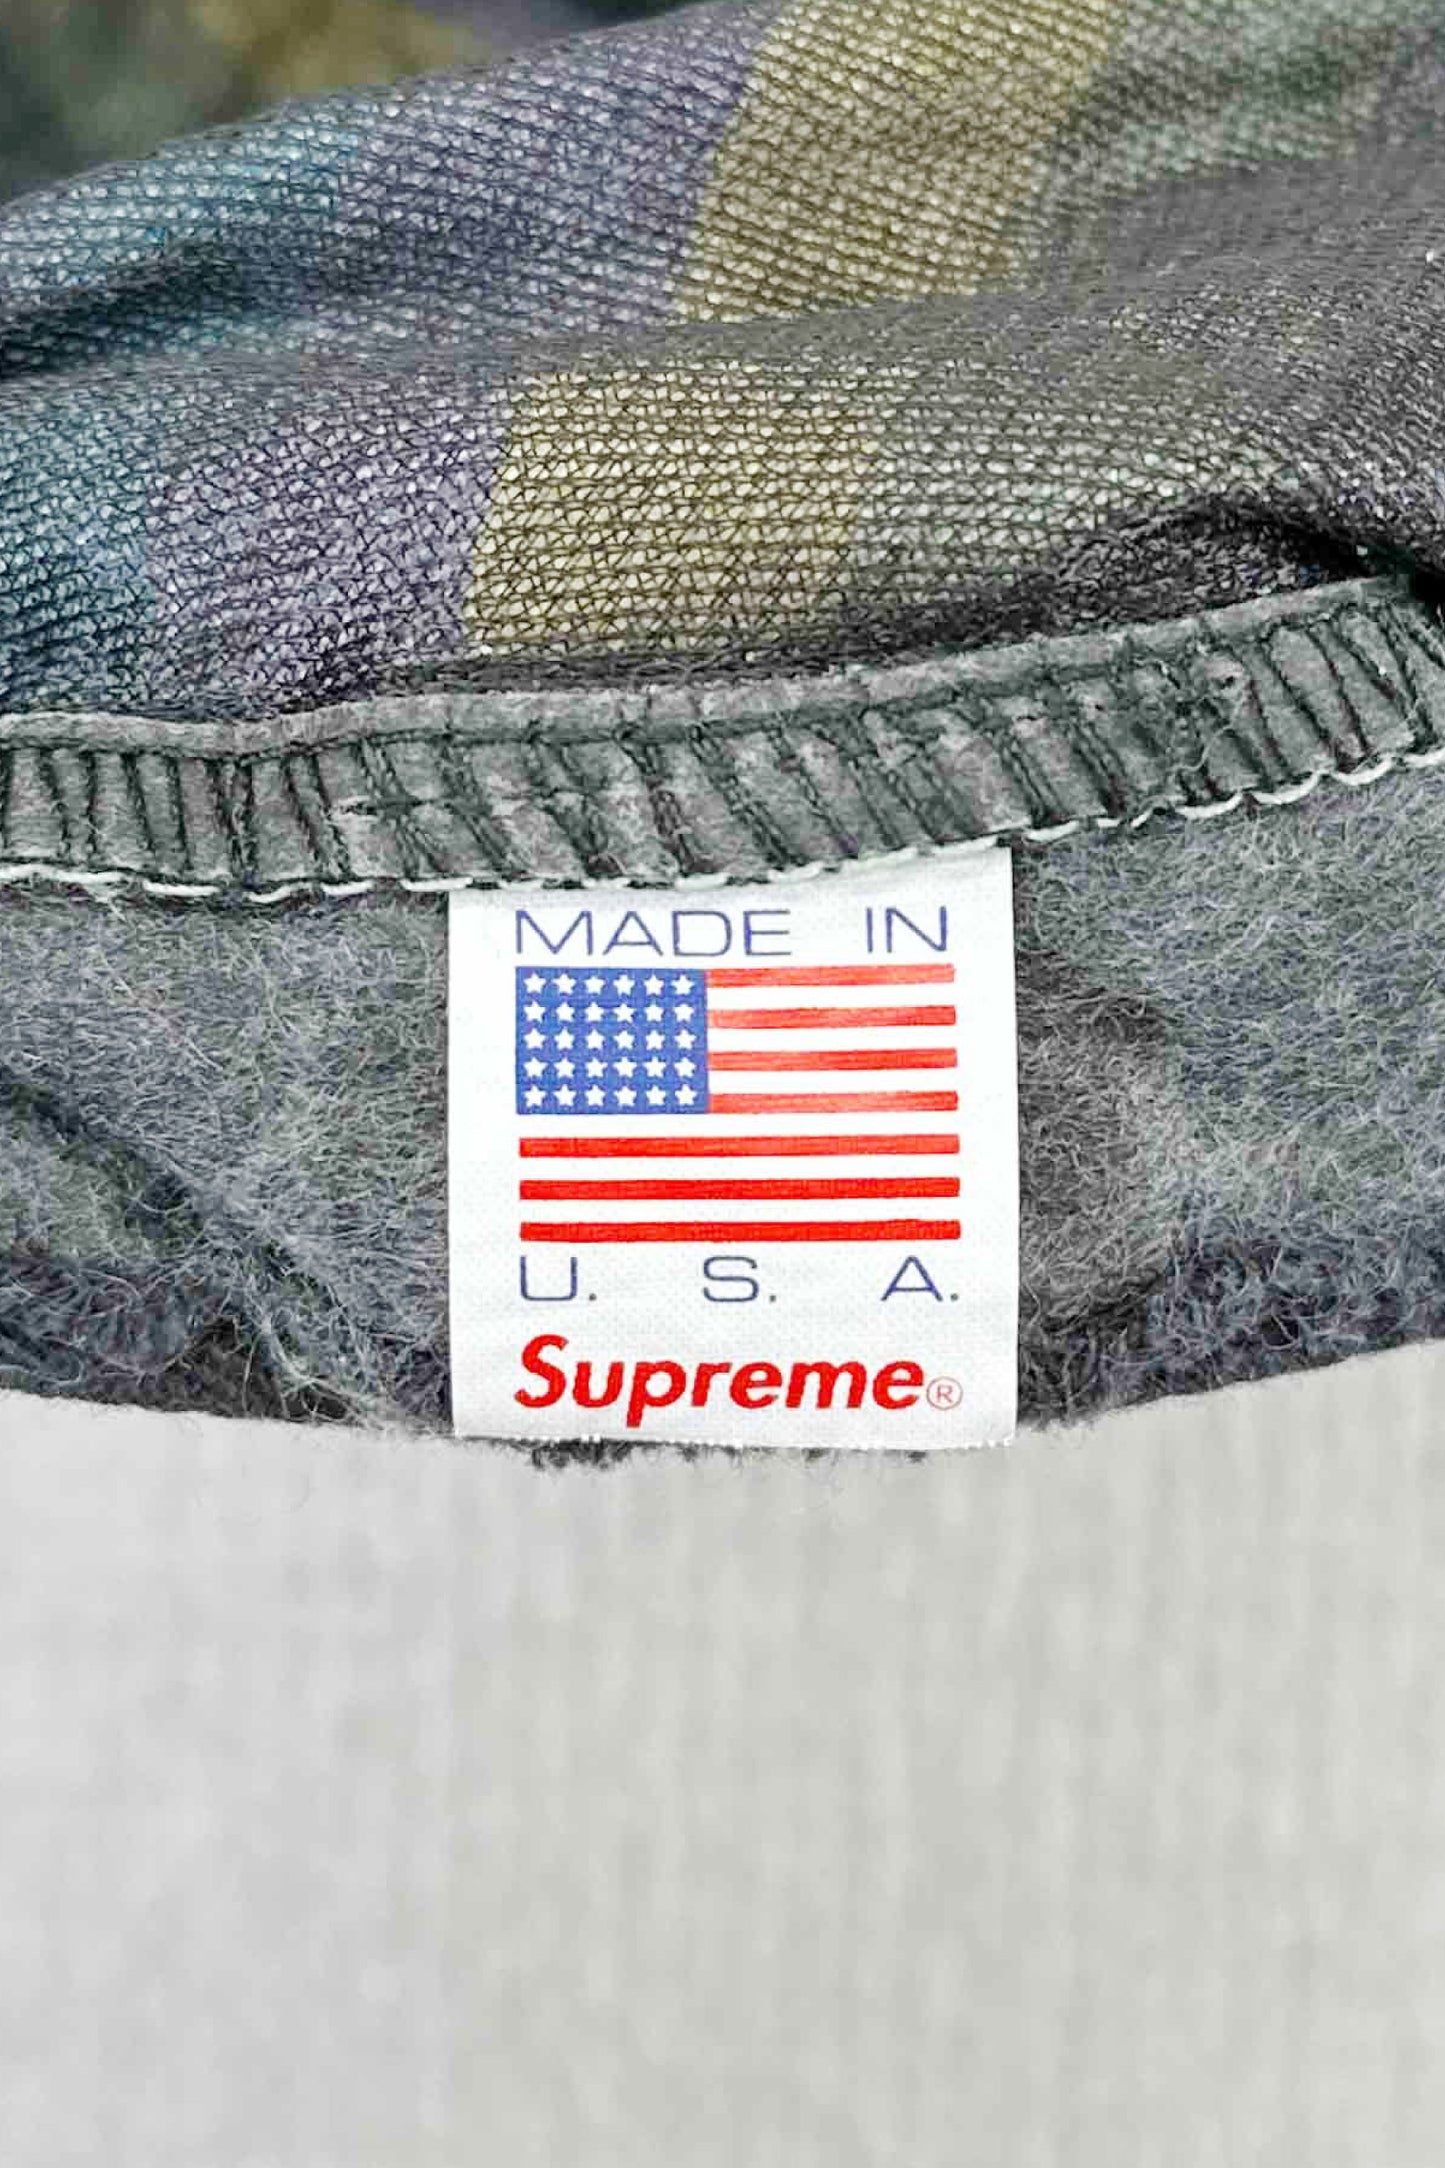 Made in USA Supreme 14SS cap